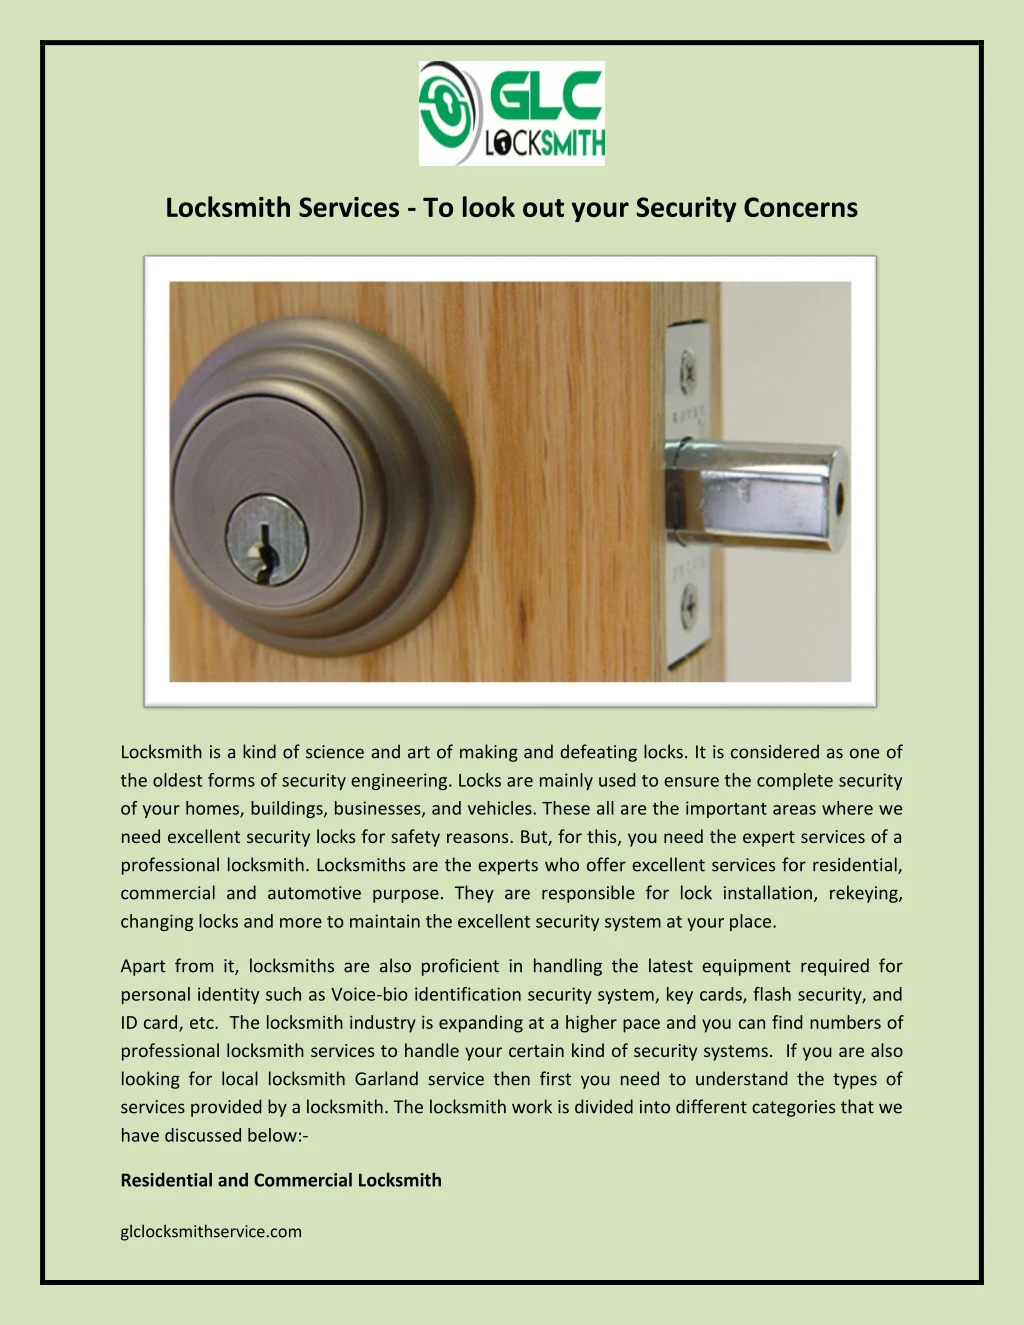 locksmith services to look out your security